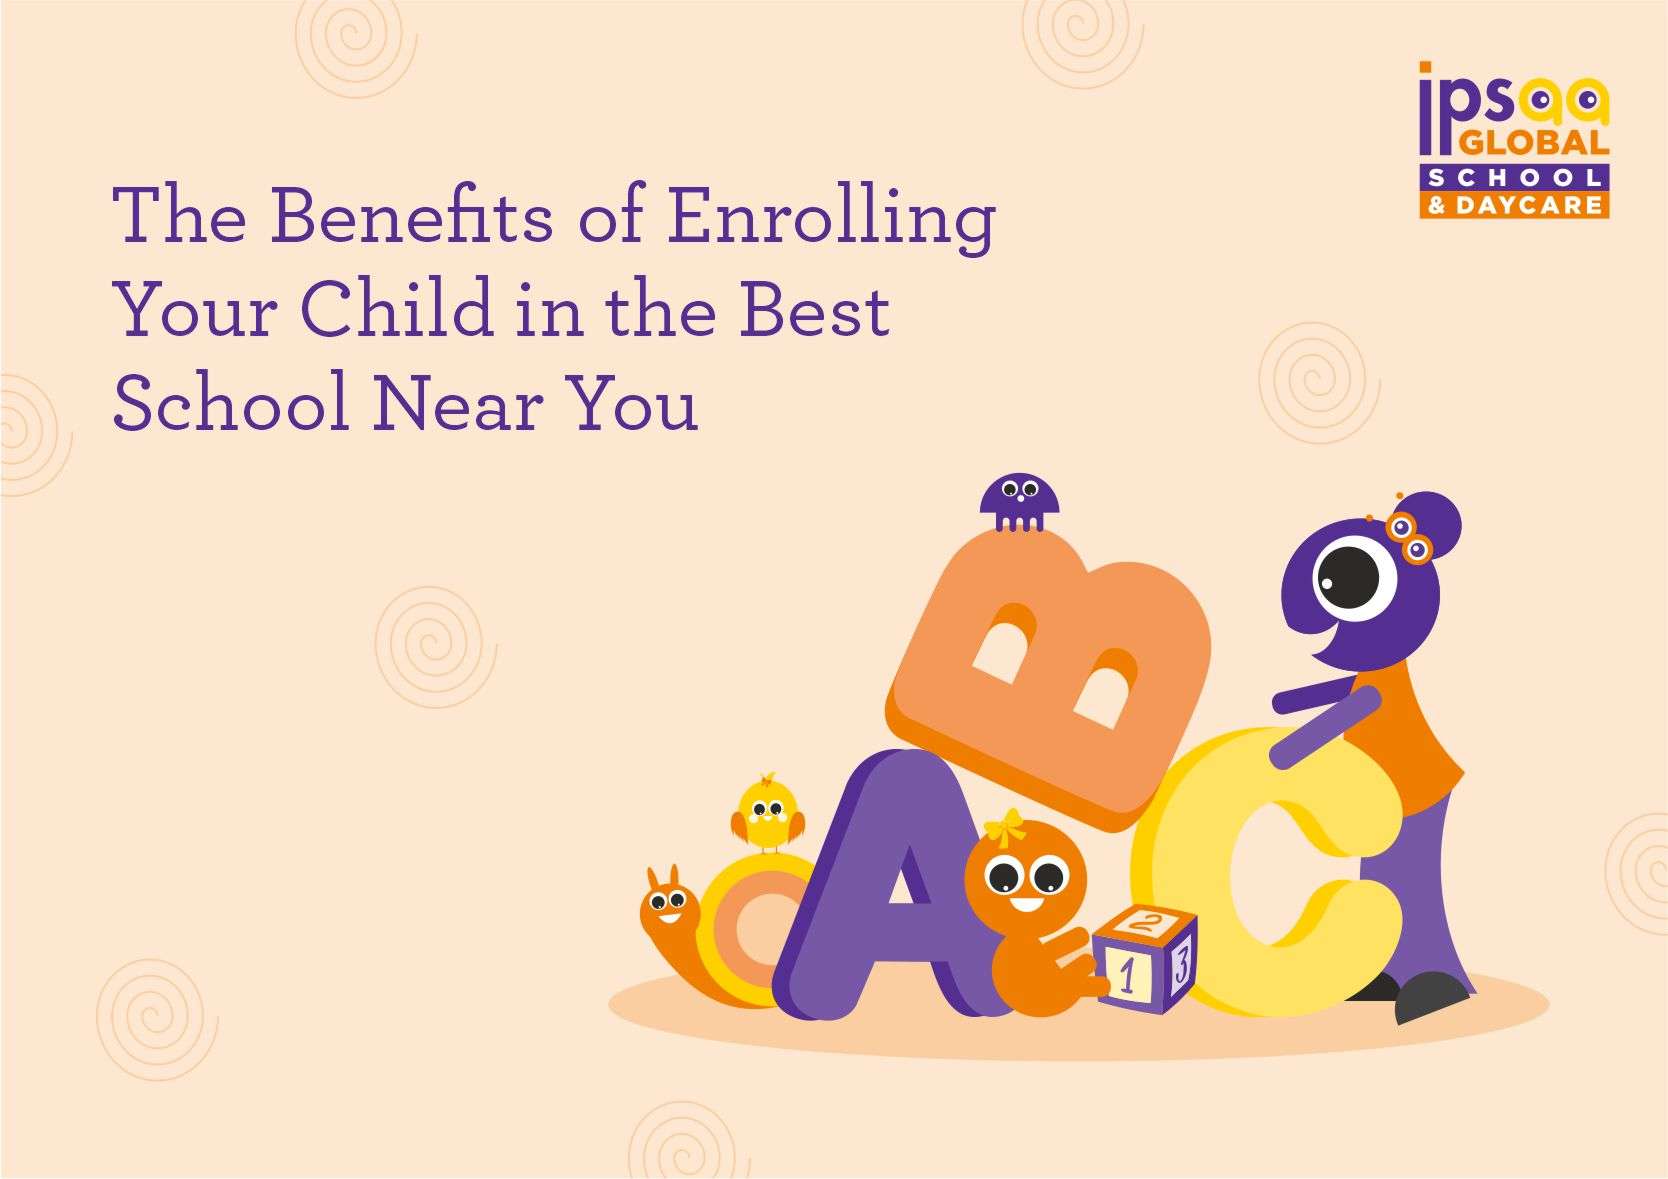 The Benefits of Enrolling Your Child in the Best School Near You